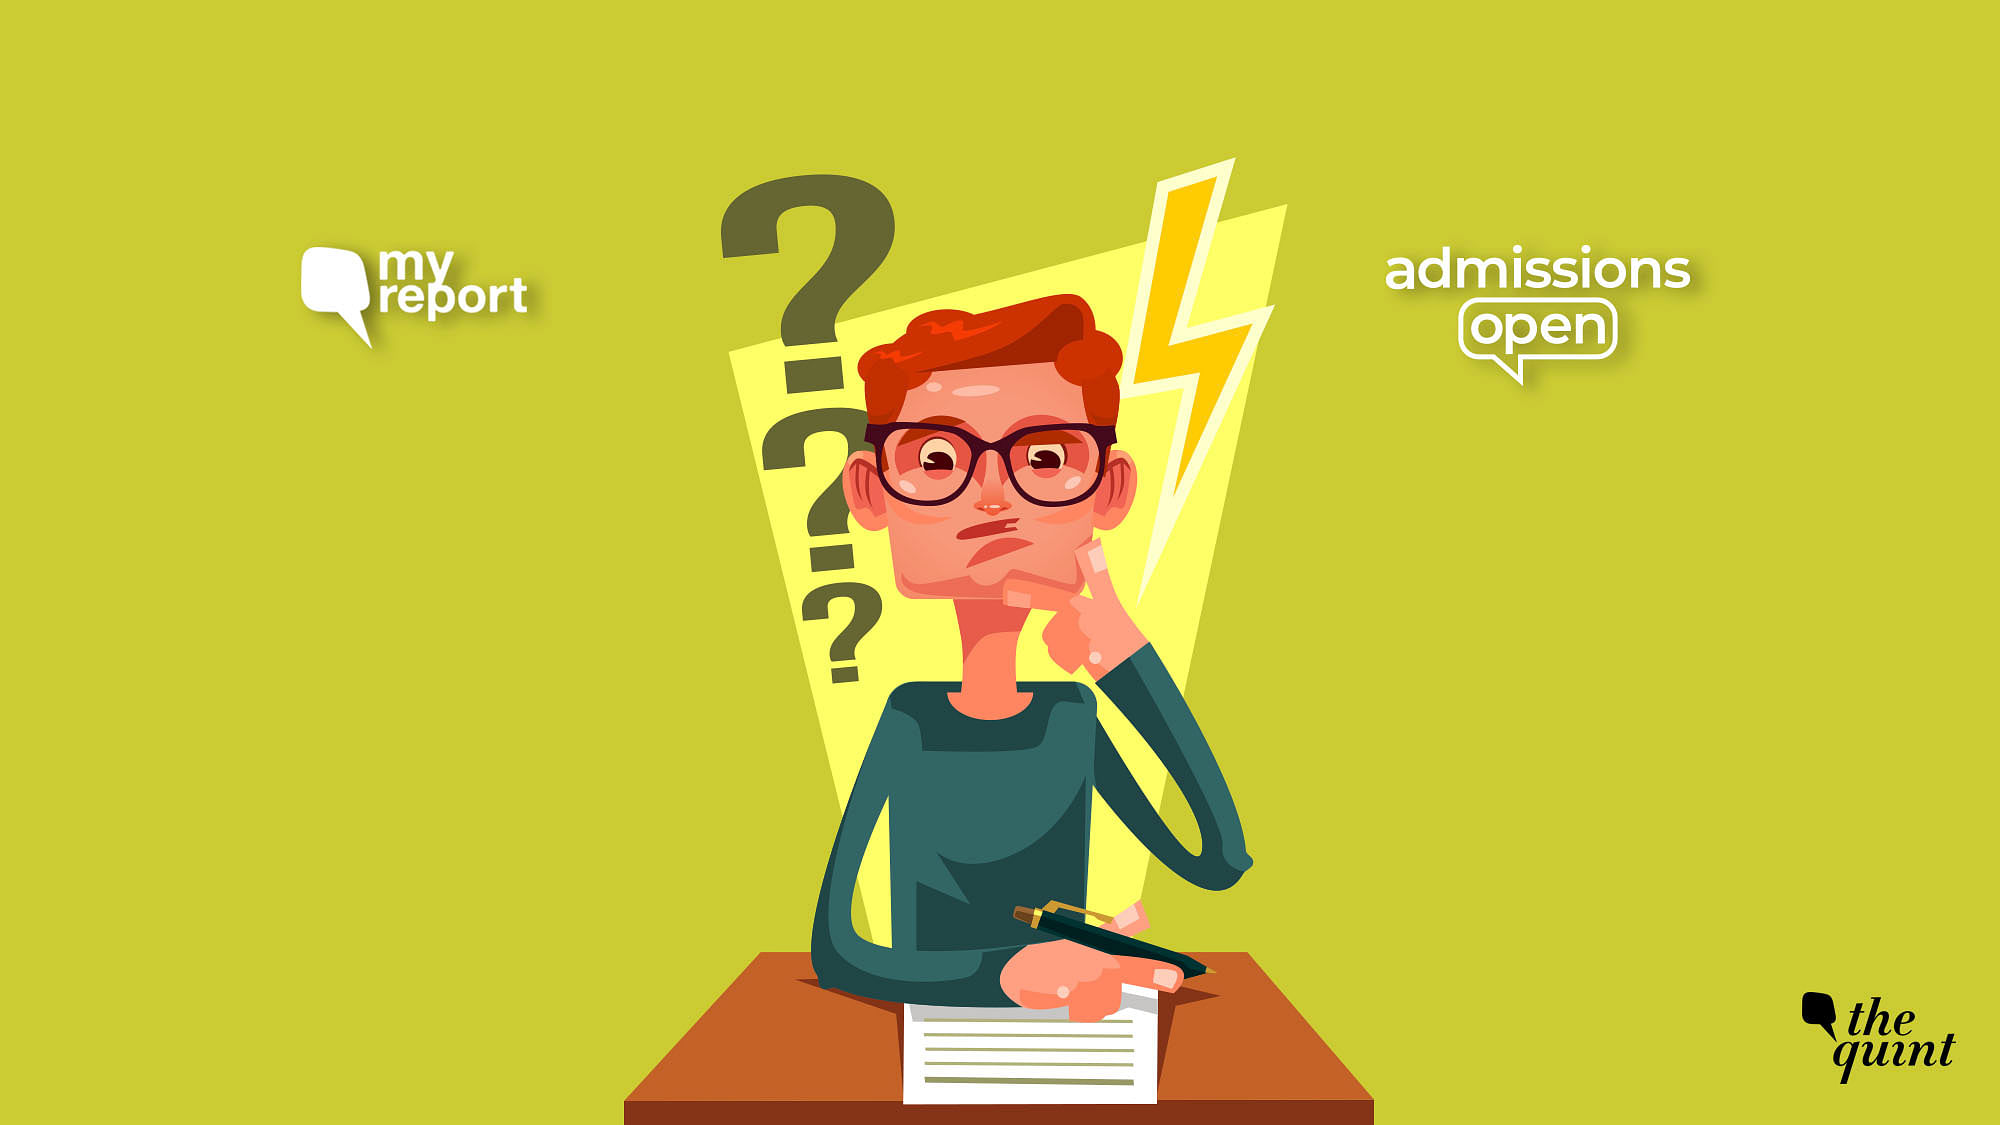 Send in your sawaals for some expert advice on eduqueries@thequint.com.